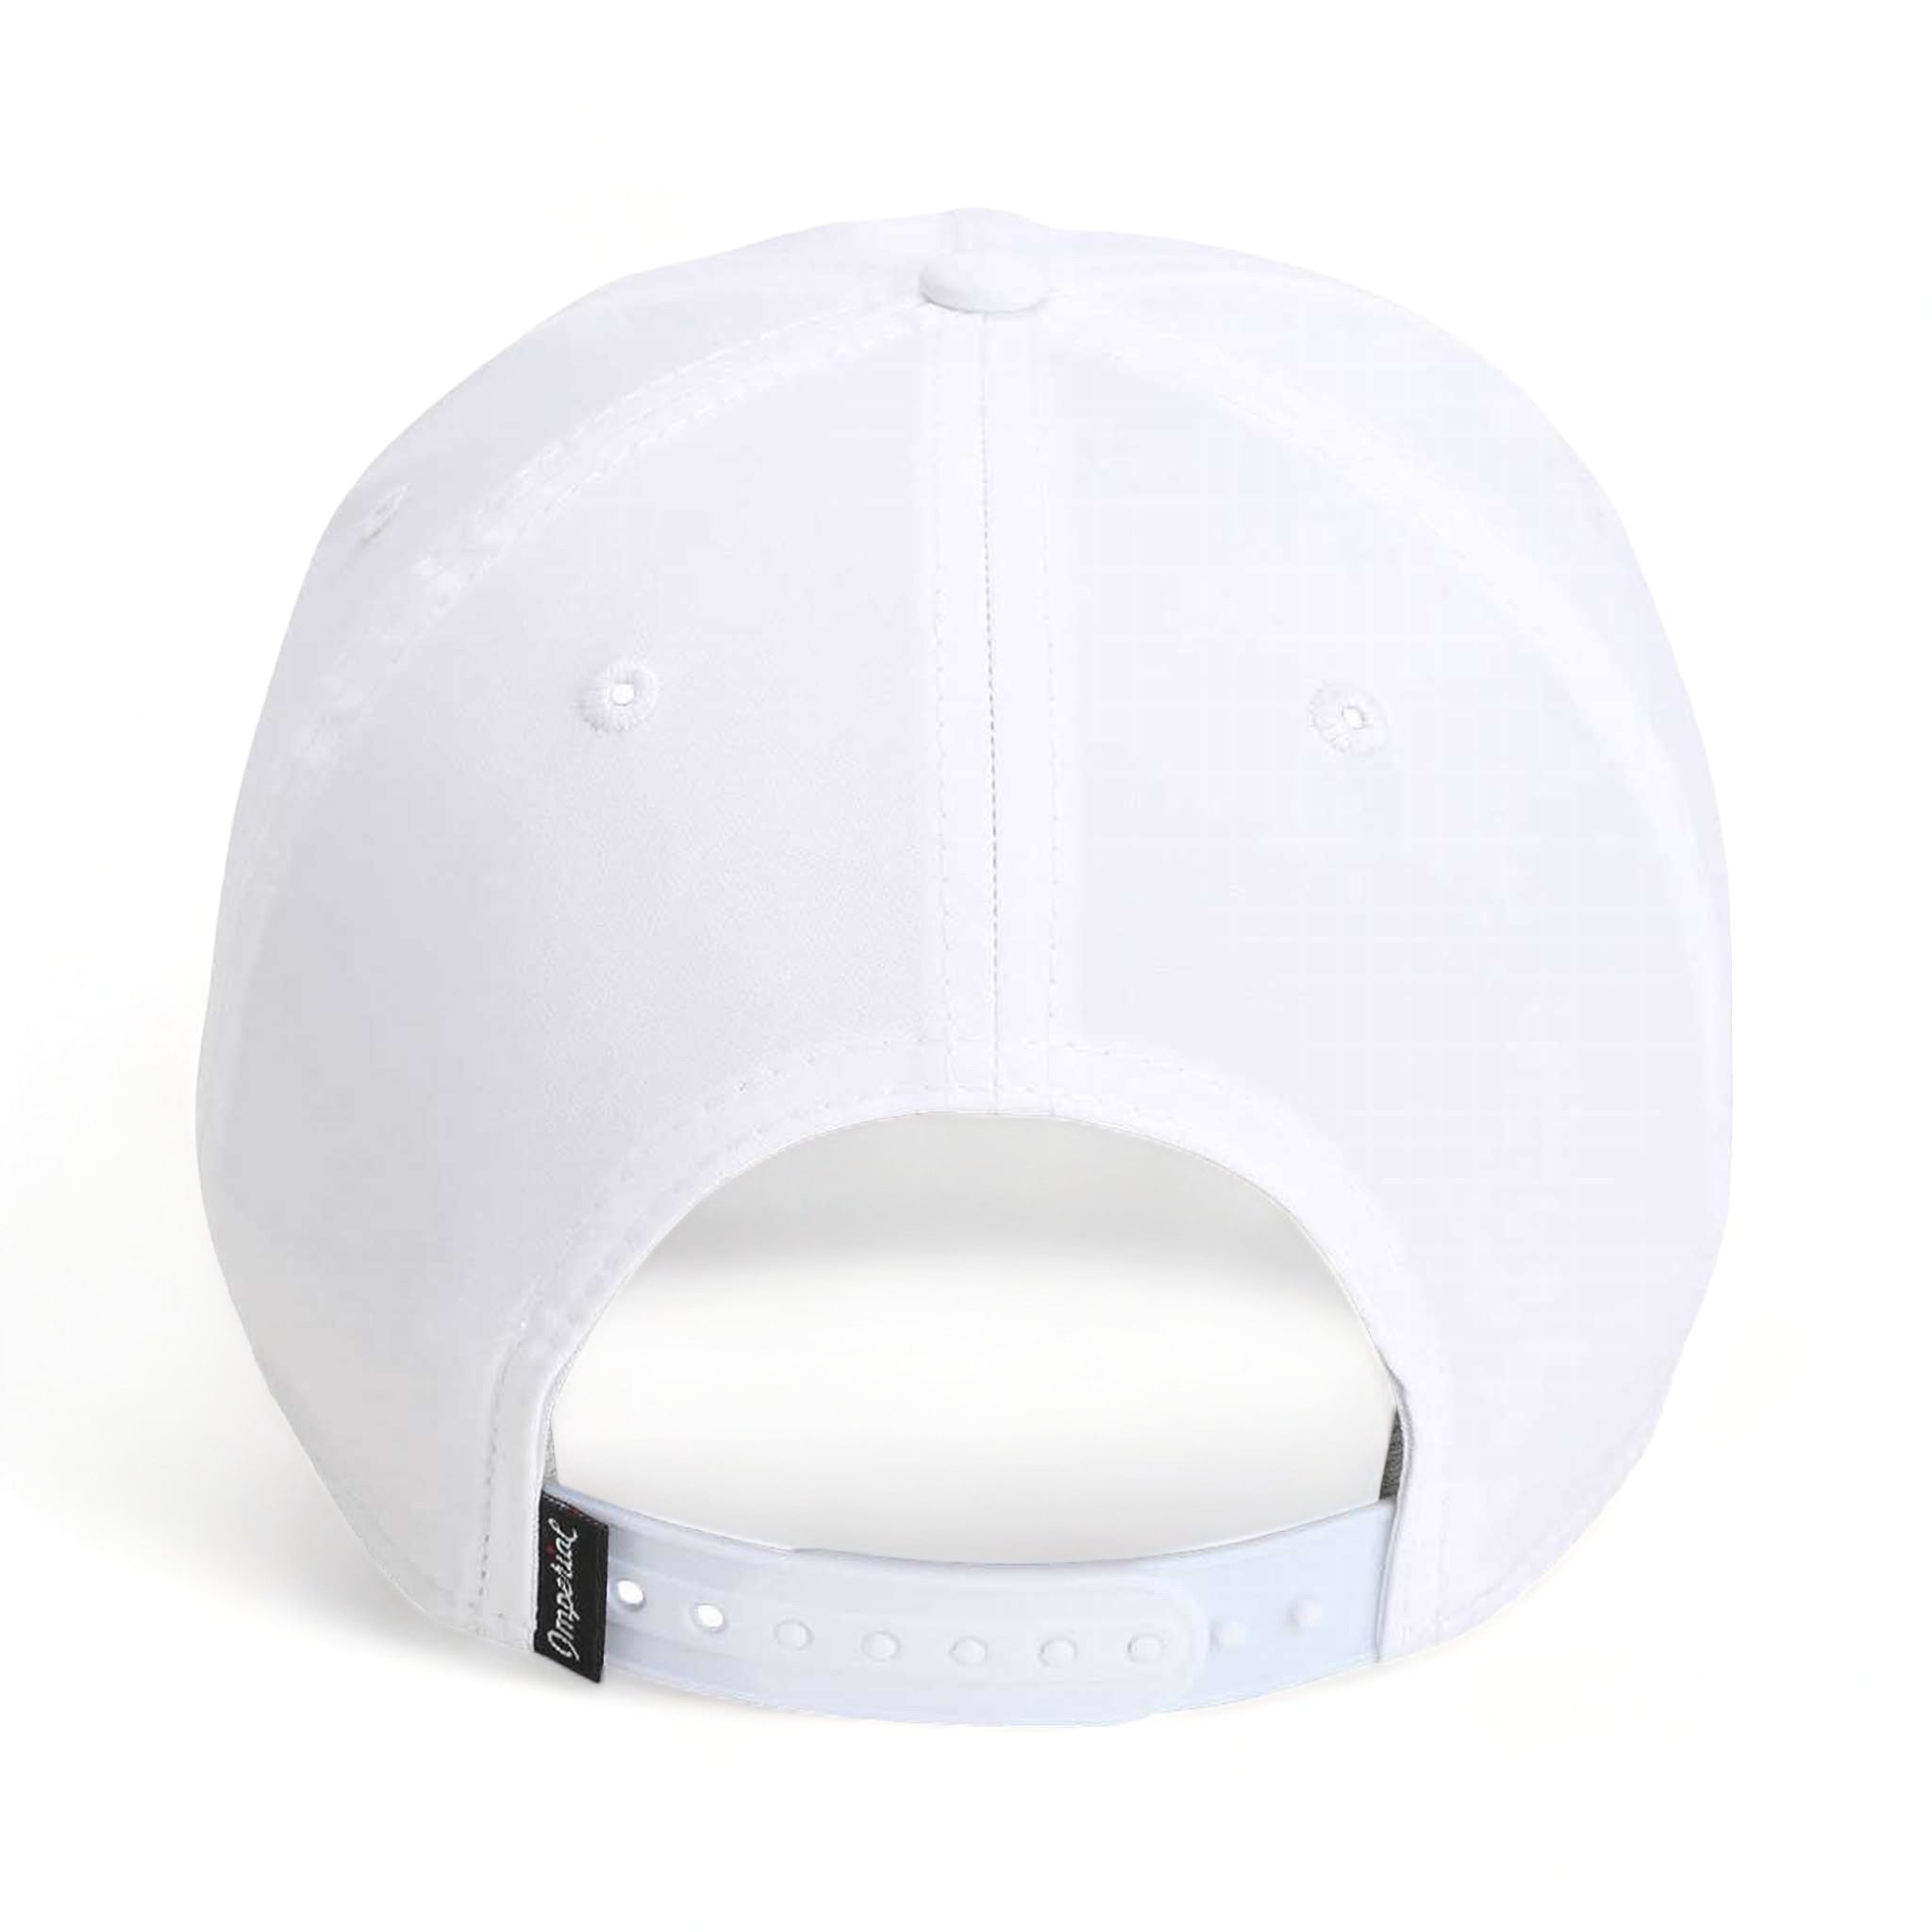 Back view of Imperial 5054 custom hat in white and neon mix